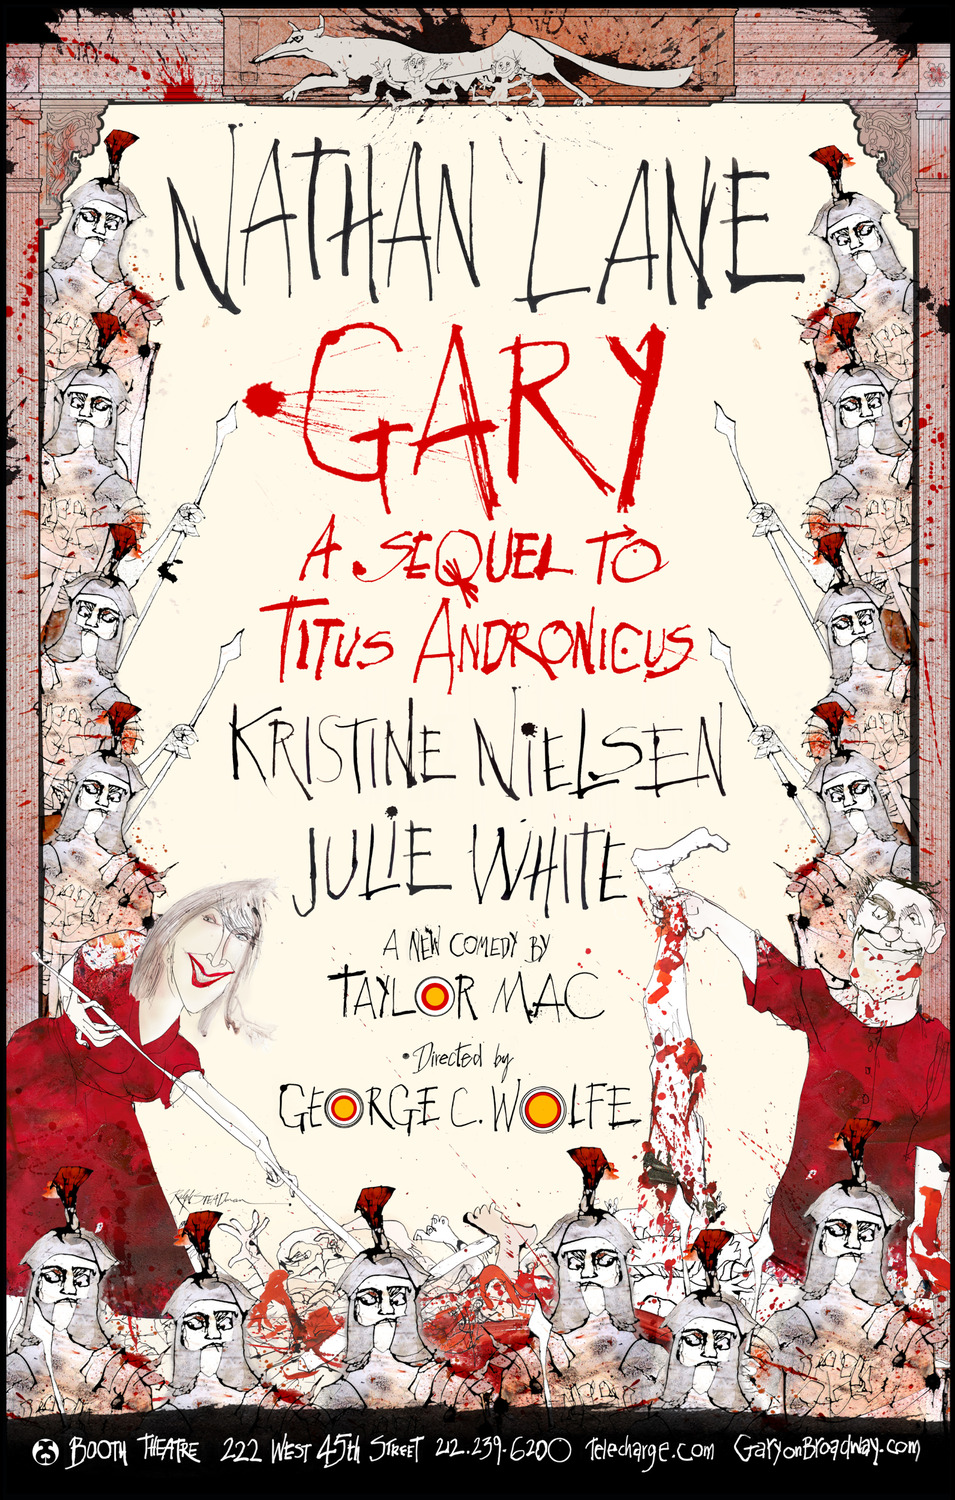 Extra Large Broadway Poster Image for Gary: A Sequel to Titus Andronicus 